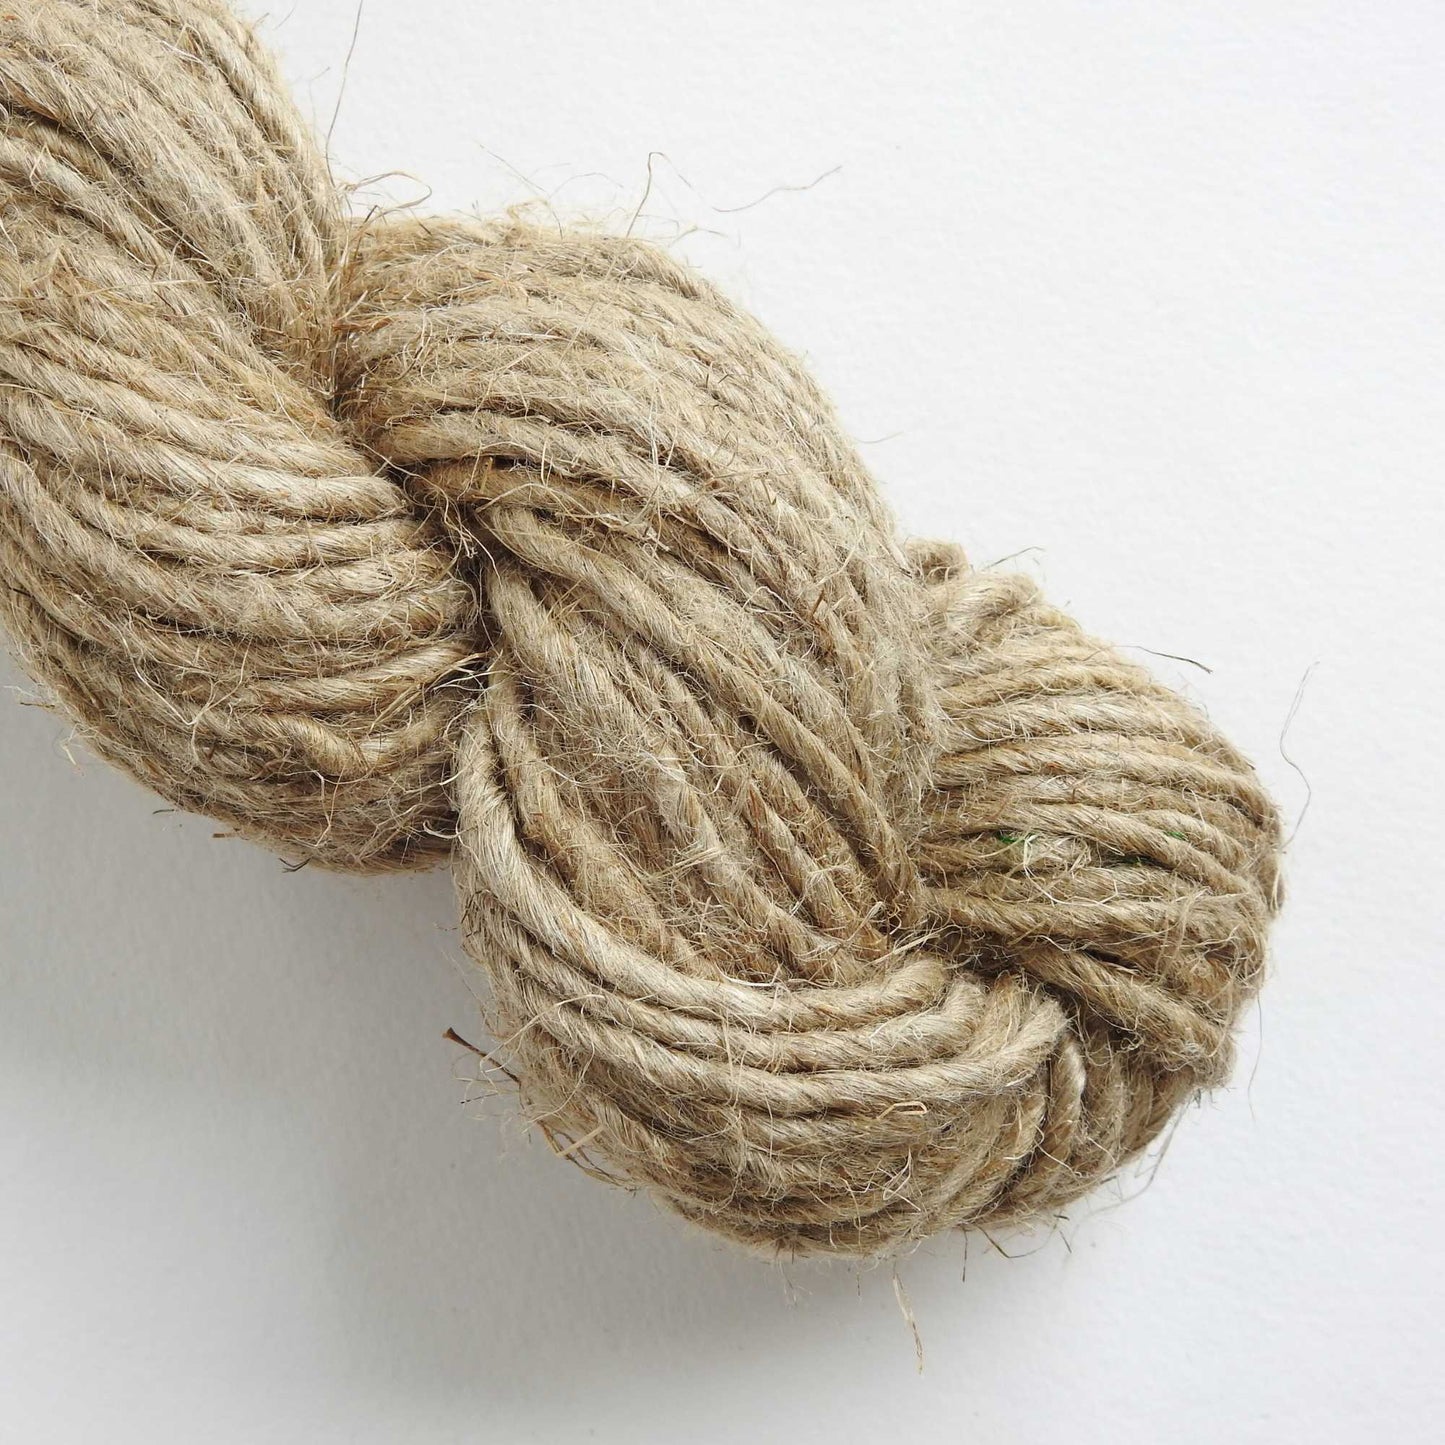 Skein of natural, unpolished Linen yarn. Thick 3mm. Natural rustic texture.  Use for macrame, weaving, baskets, bags, hats, mats.